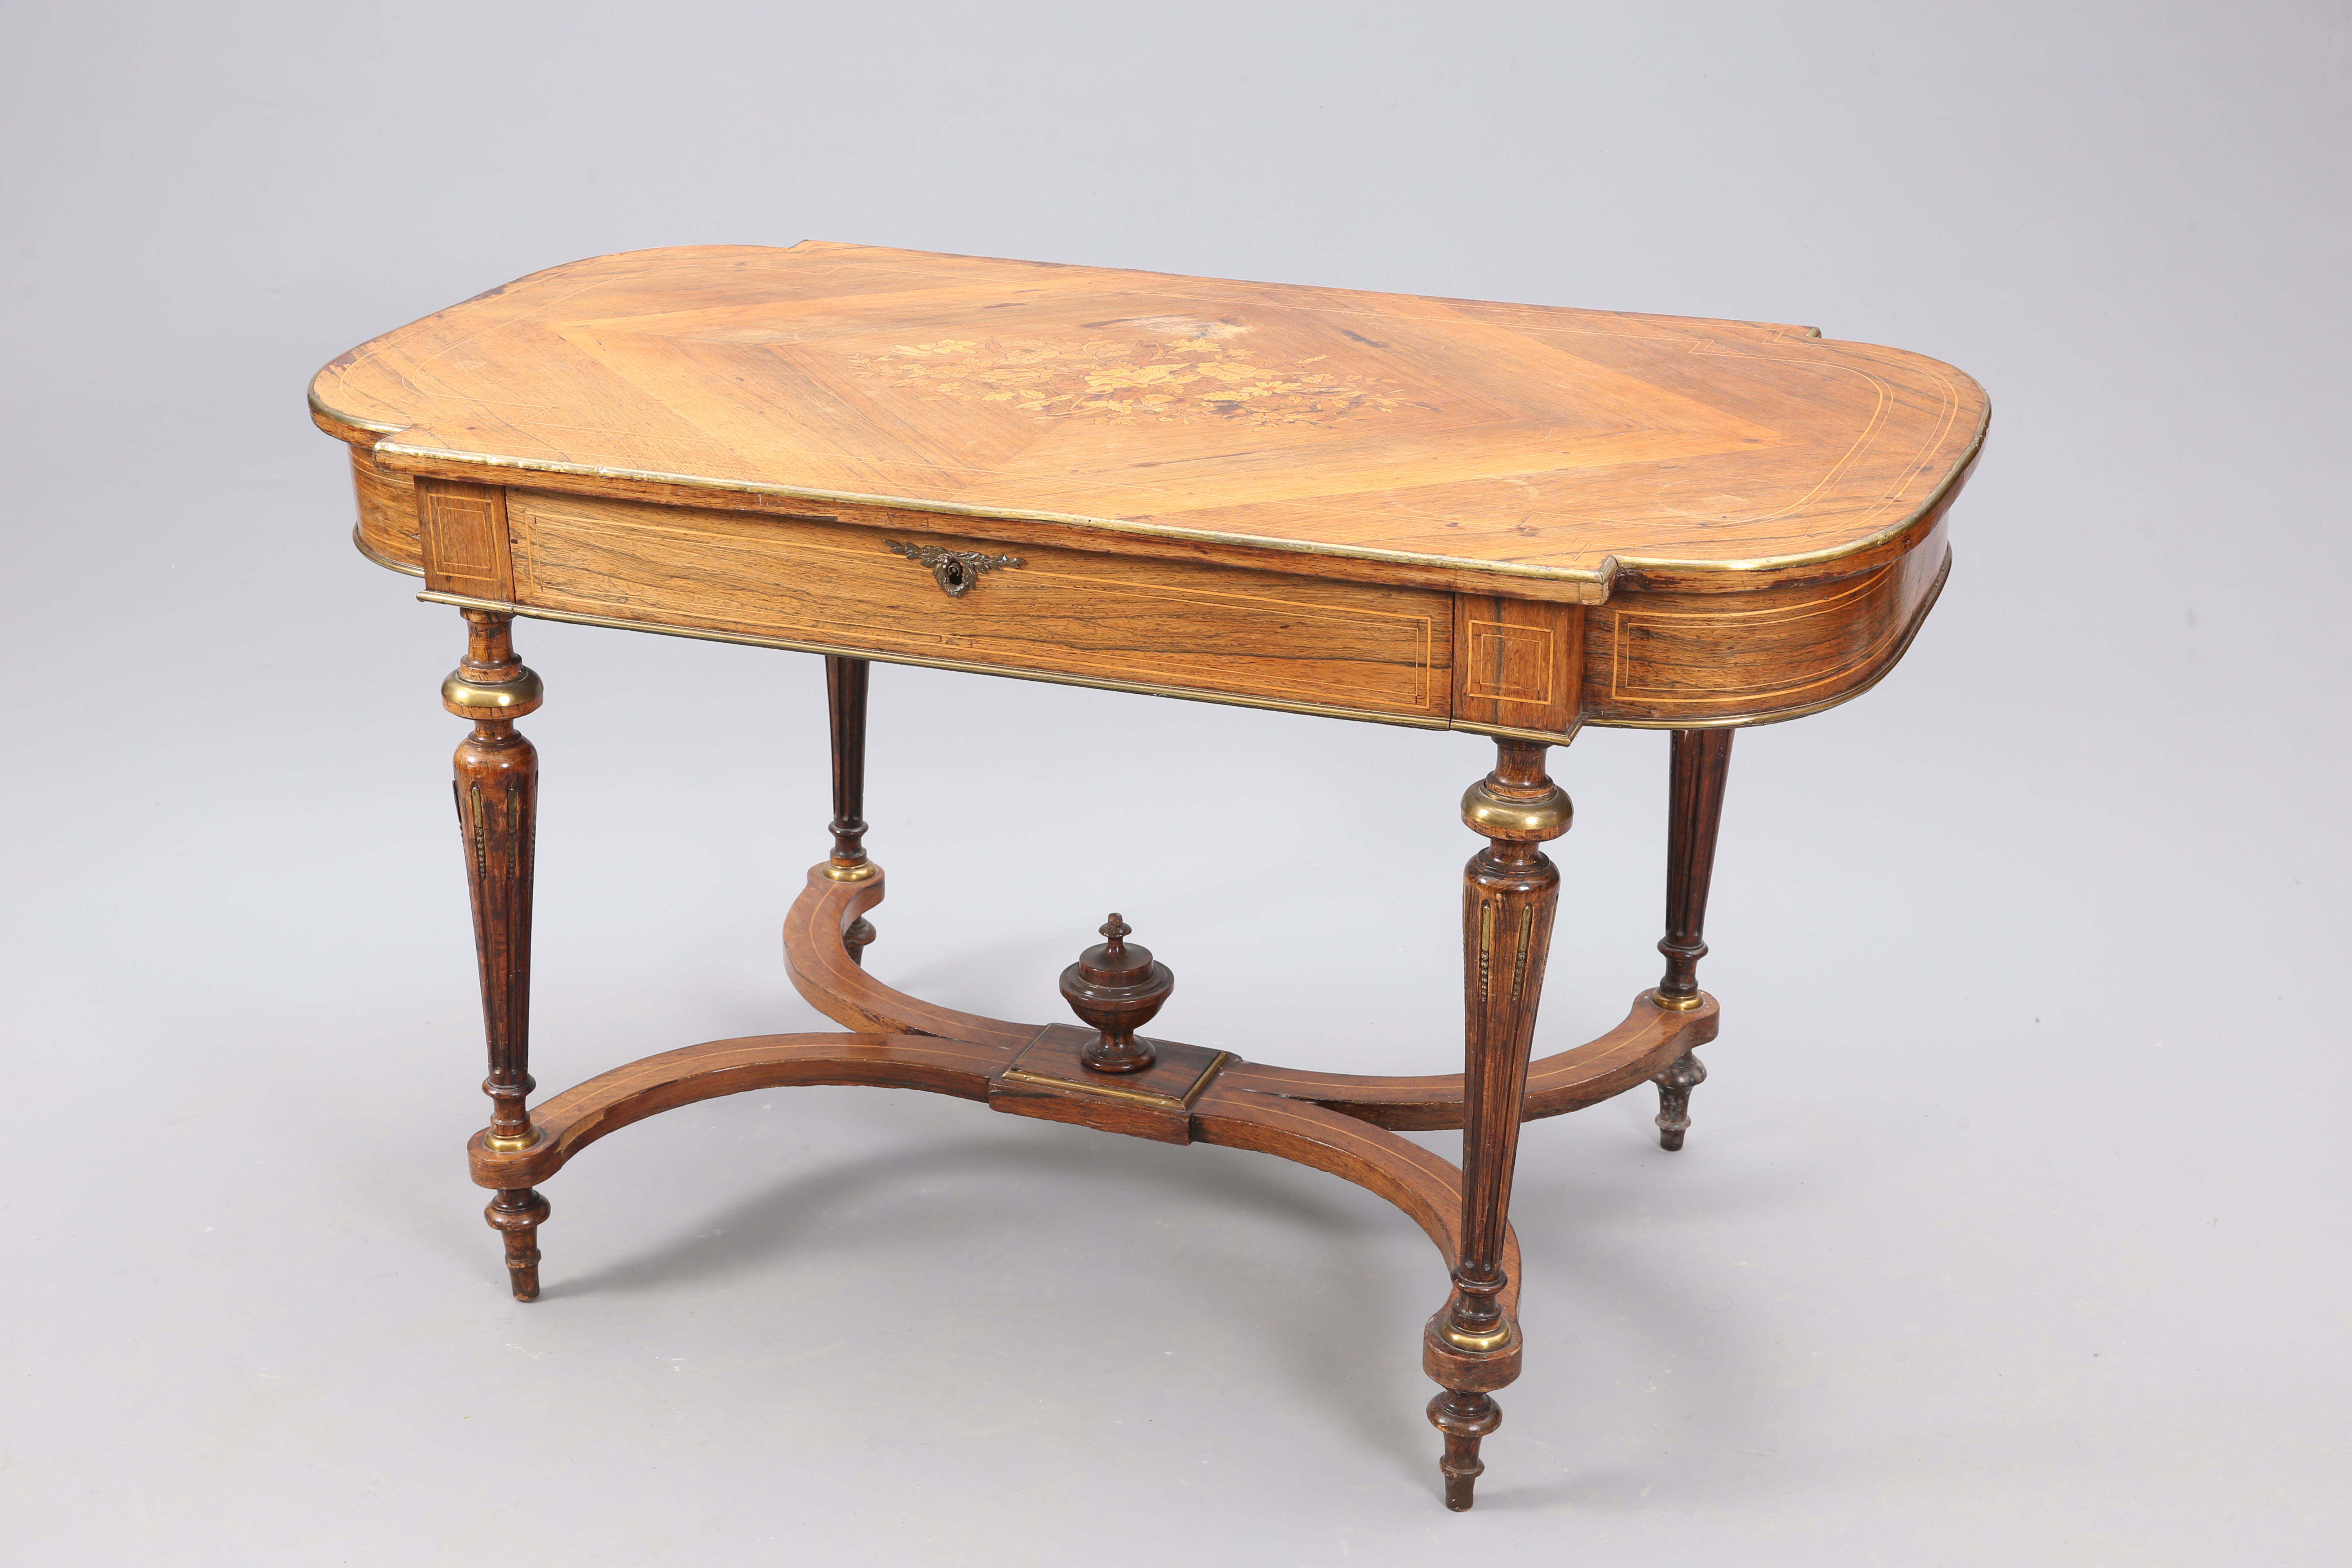 A FRENCH ROSEWOOD, FLORAL MARQUETRY AND BRASS MOUNTED BUREAU PLAT, LATE 19TH CENTURY